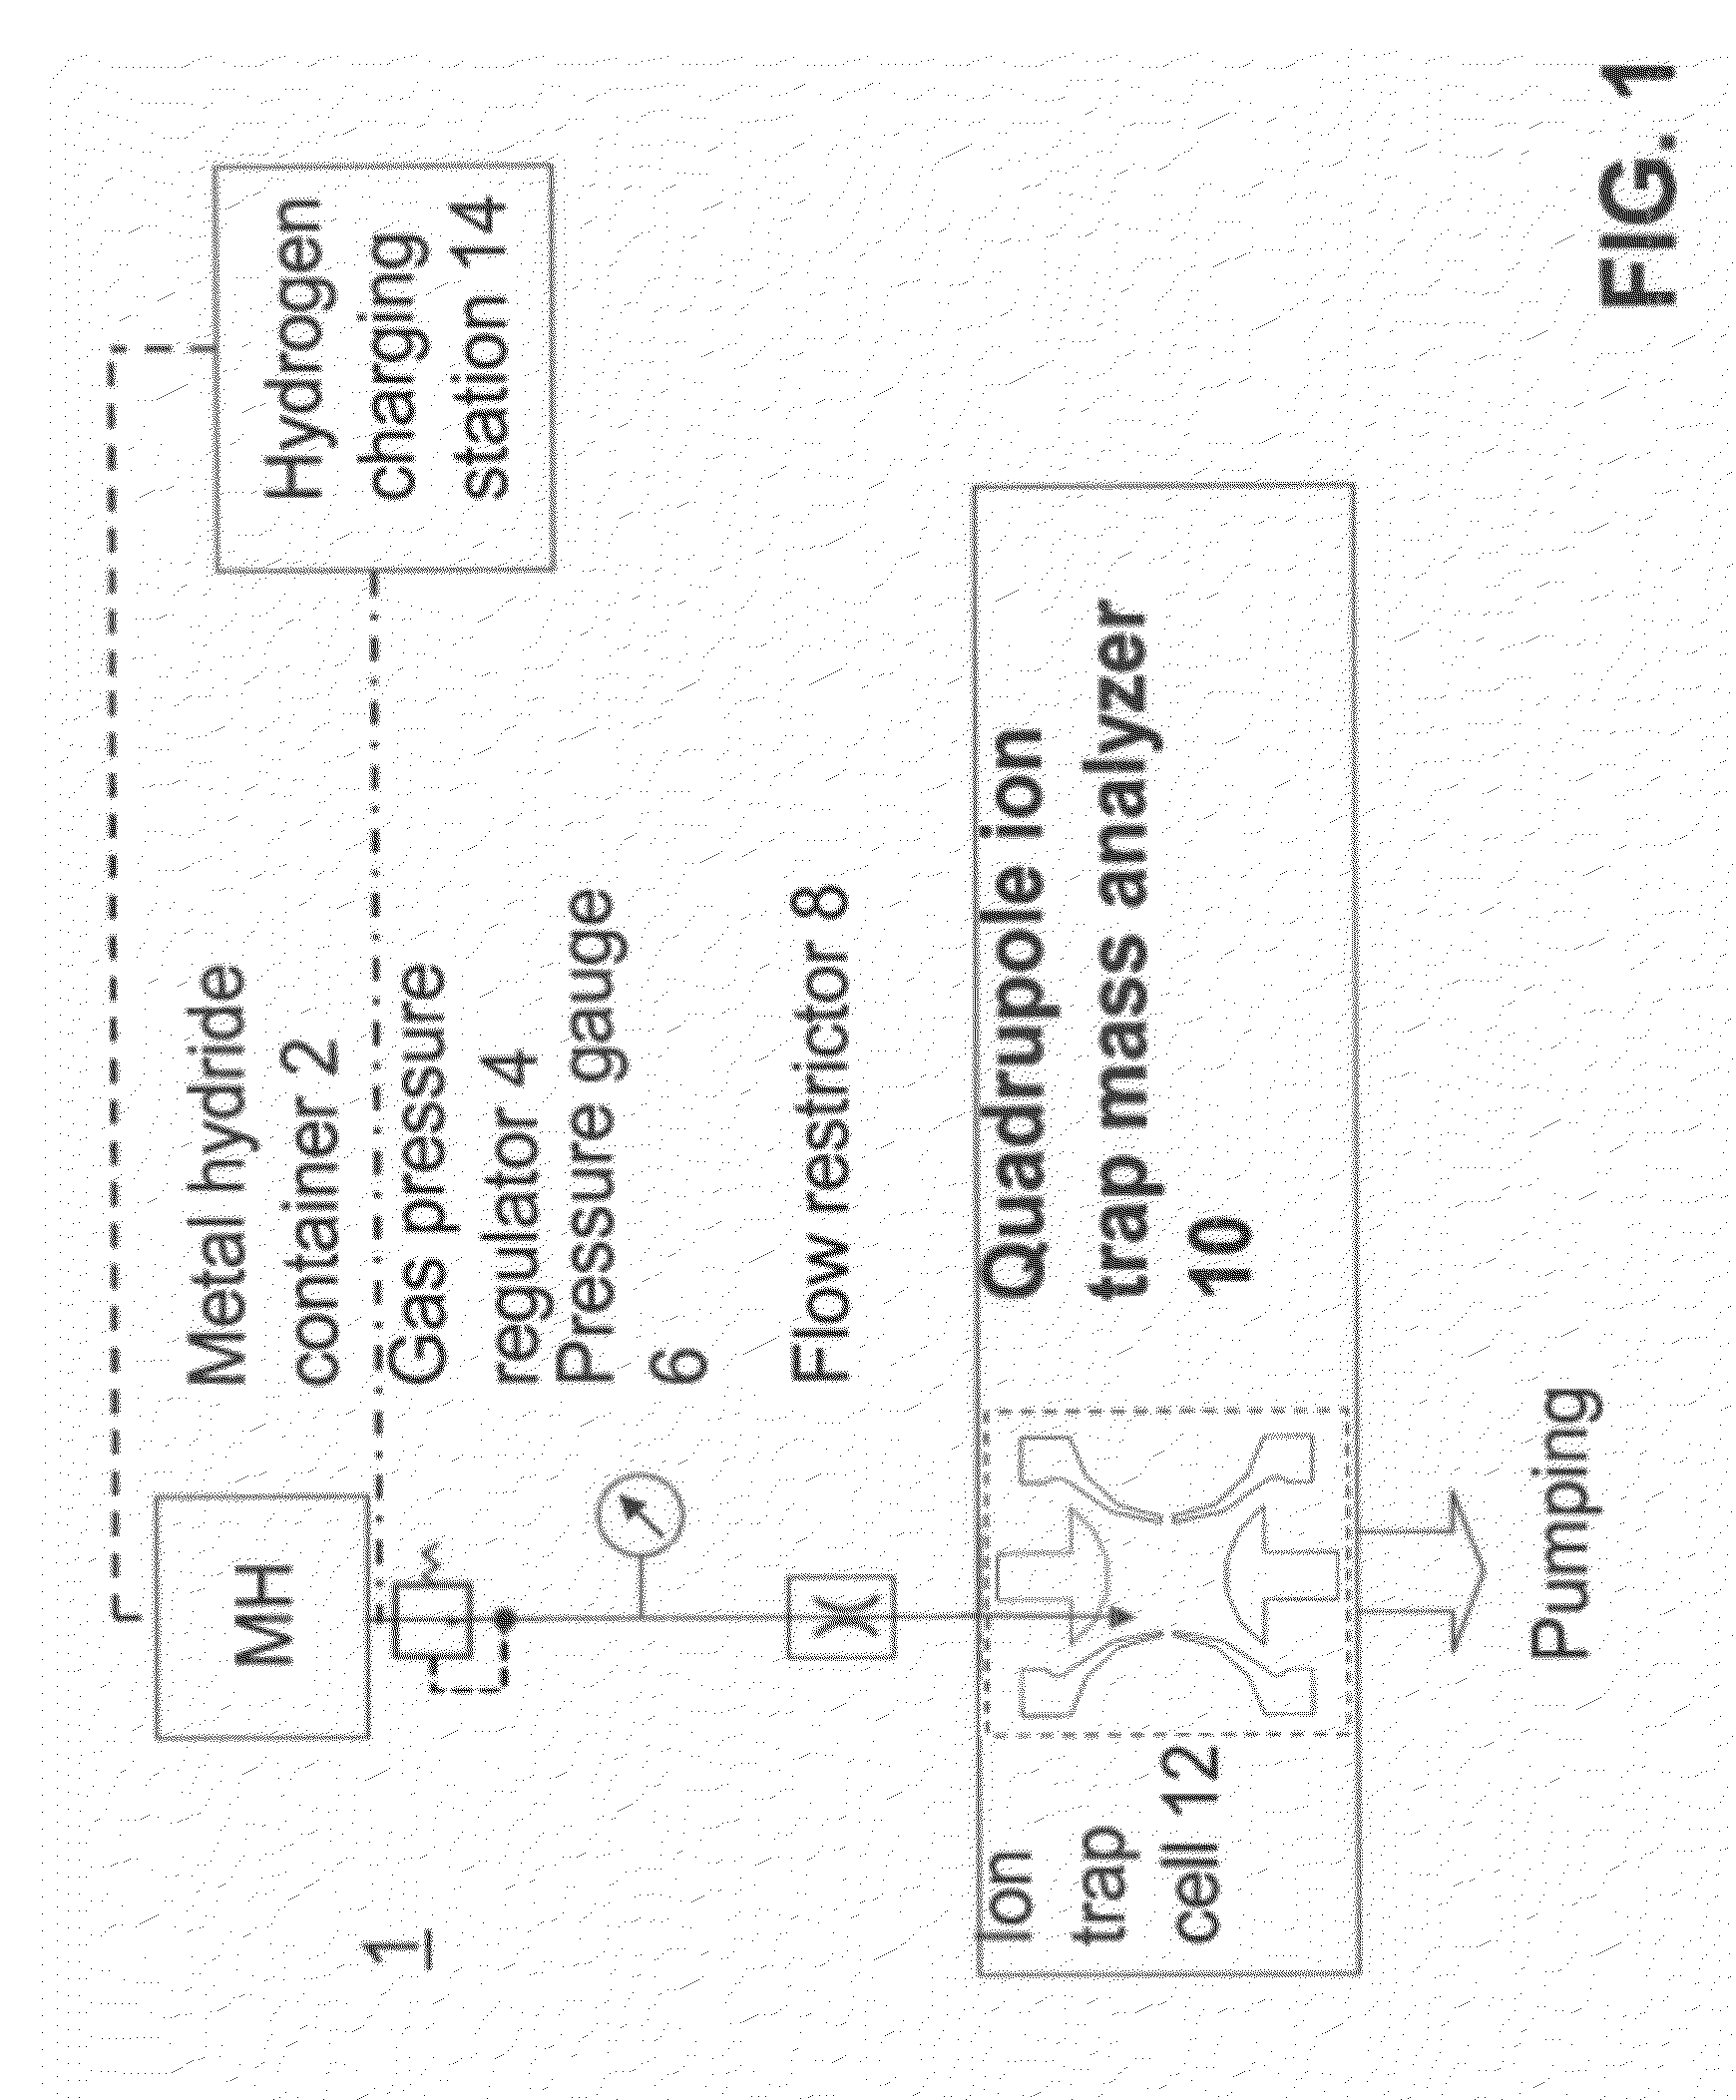 Portable ion trap mass spectrometer with metal hydride container as source of hydrogen buffer gas